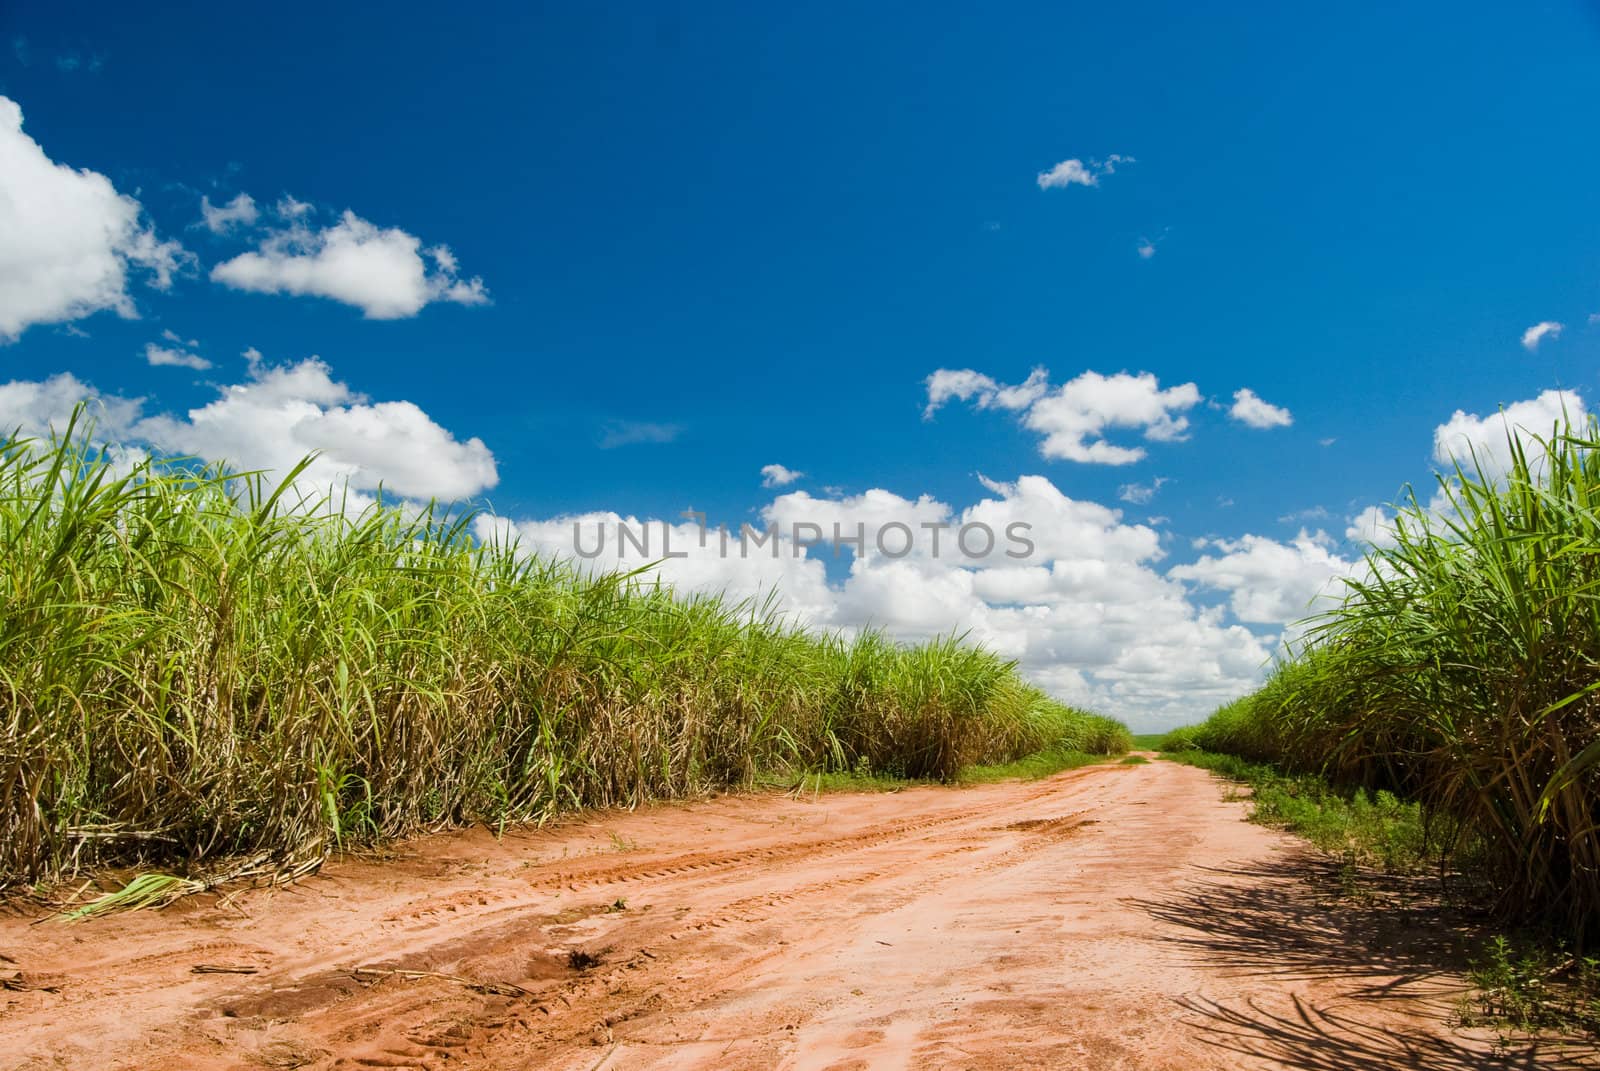 Road for the Sugar Cane Field. Brazil produces about one-third of the sugarcane production in the world.